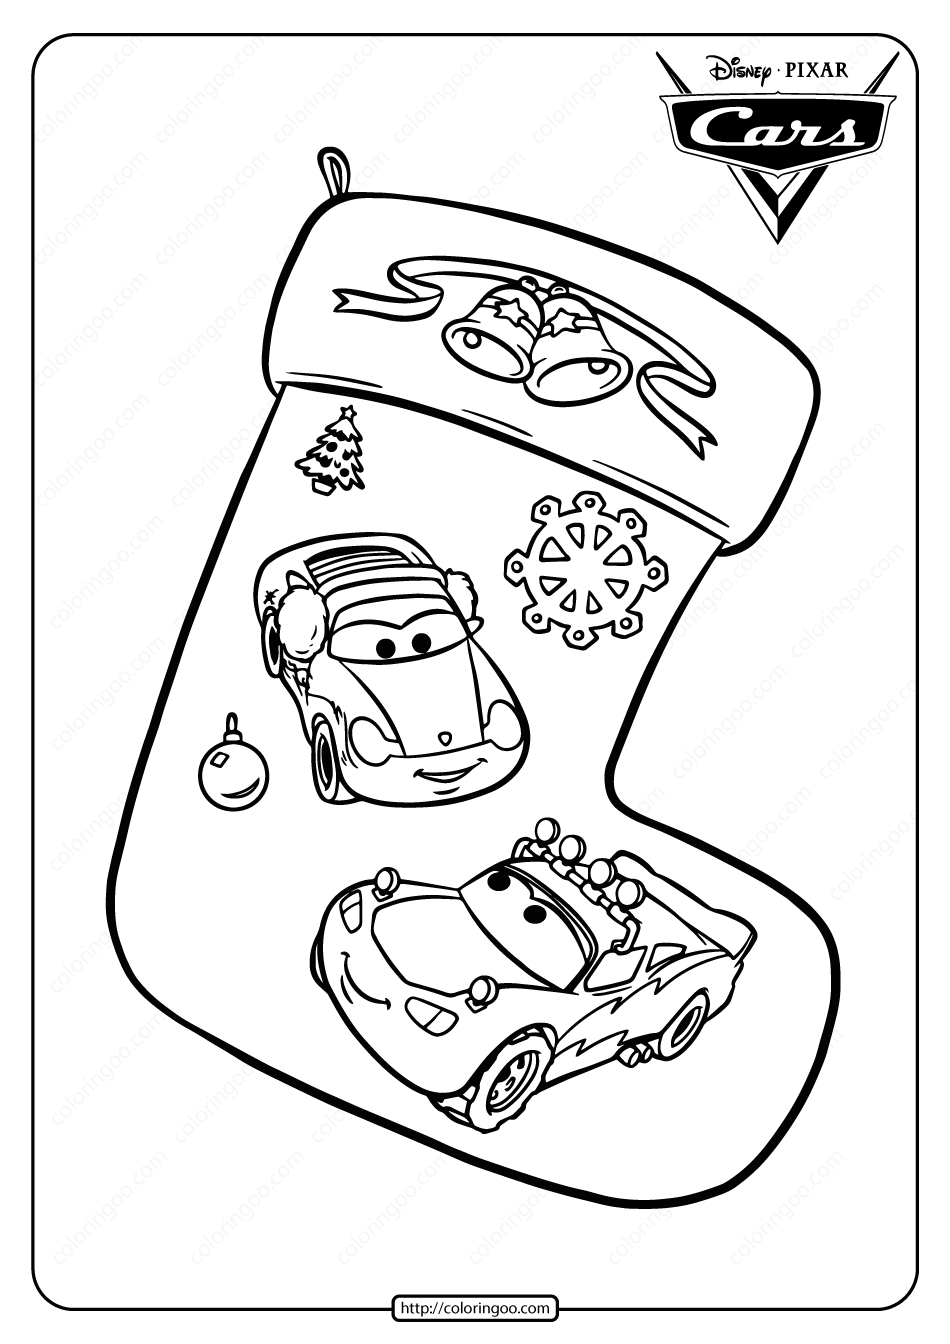 disney pixar cars christmas stocking coloring pages